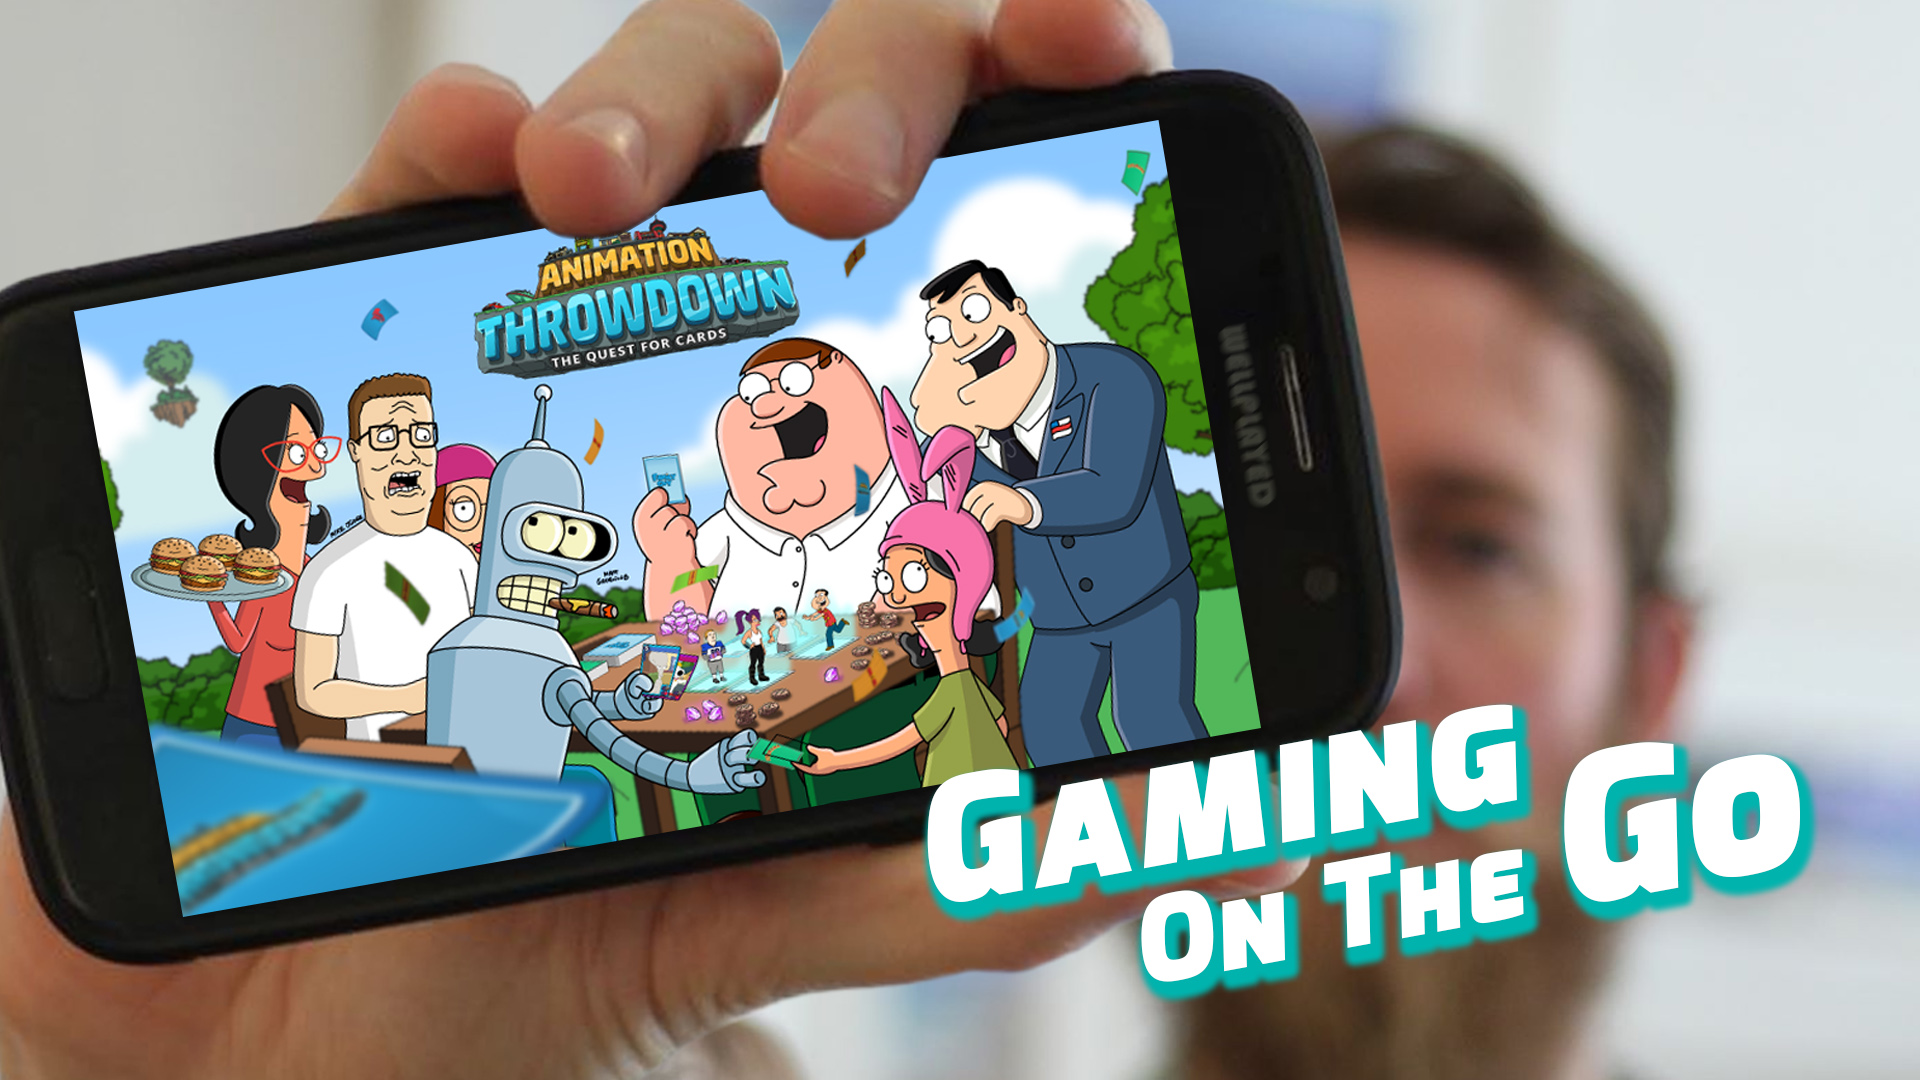 Gaming On The Go – Animation Throwdown: The Quest For Cards